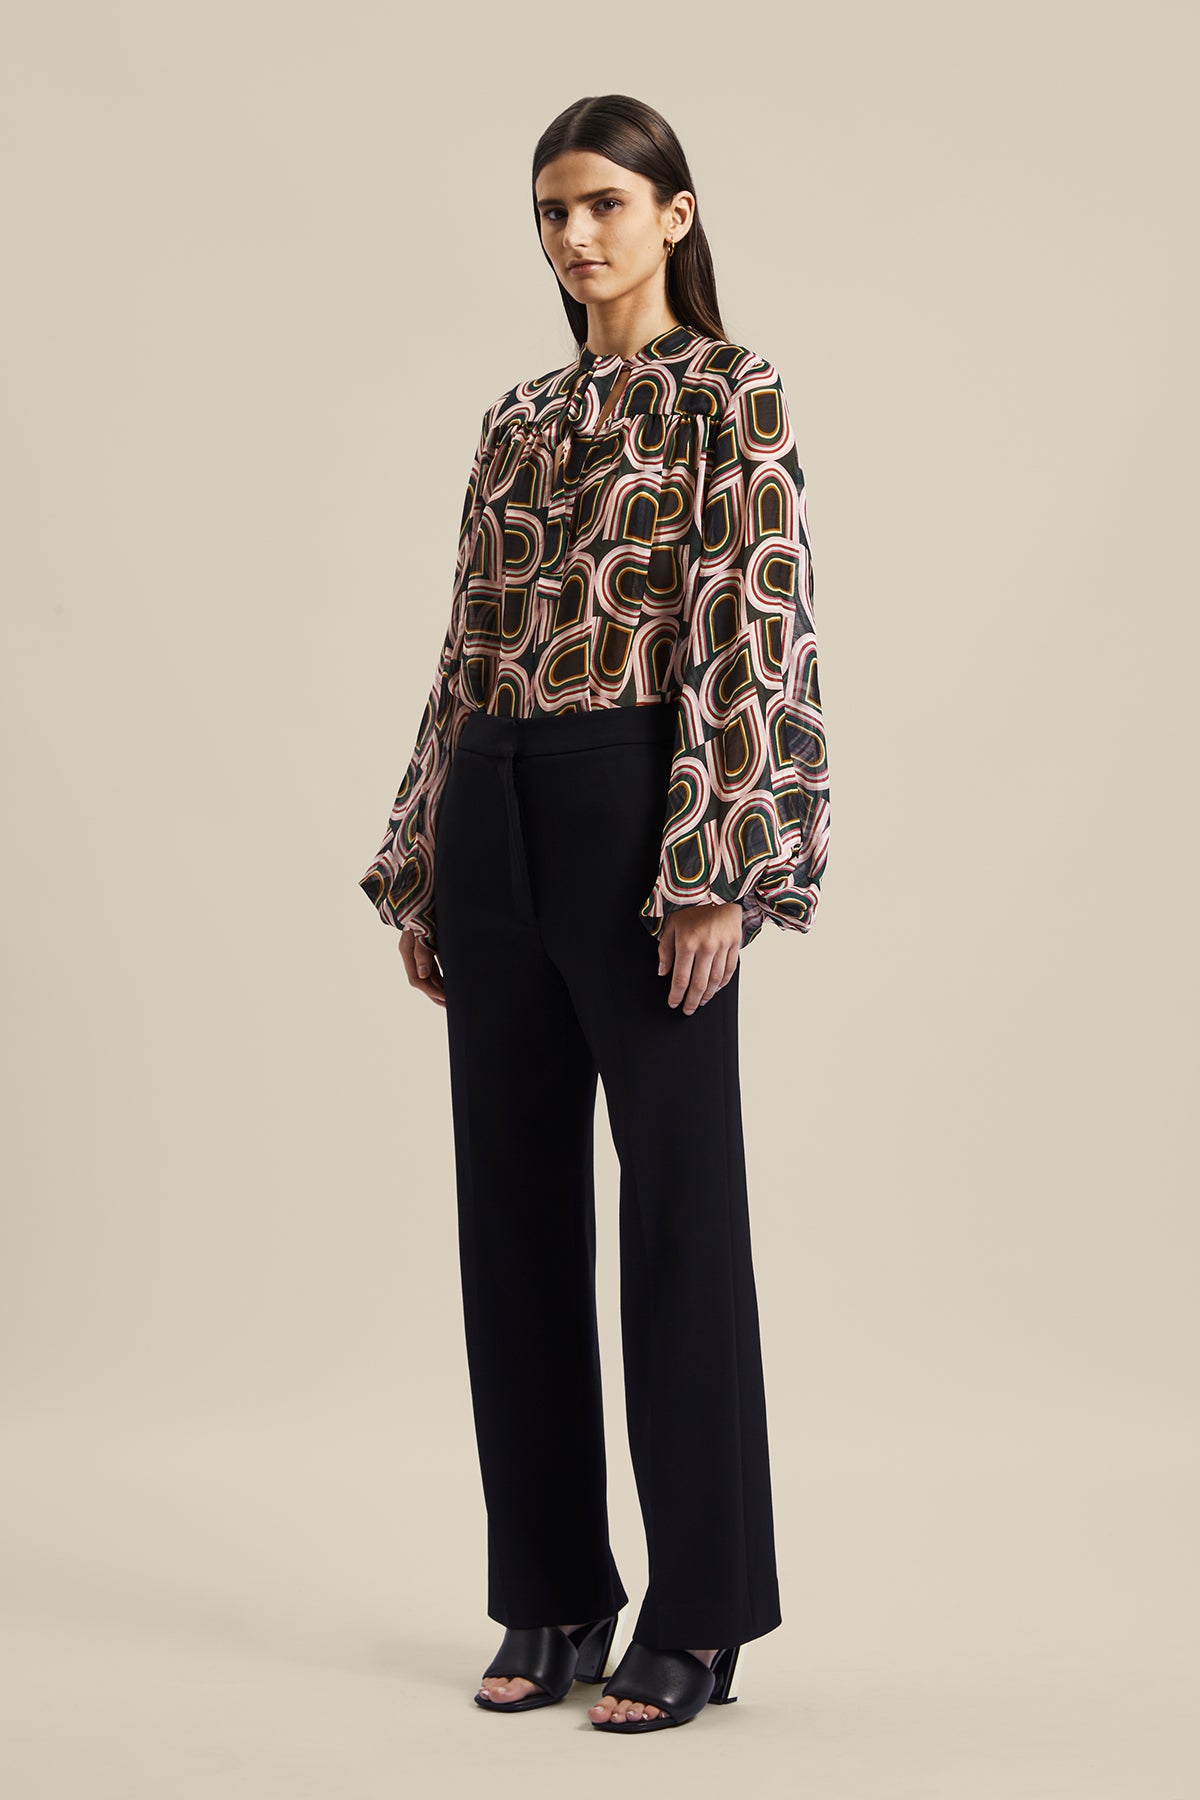 Model wearing the black women’s Rhetoric Pant from Australian Fashion Designer GINGER & SMART, featuring a slim fit, cropped straight leg with side pockets. Worn with the Kinship Blouse.